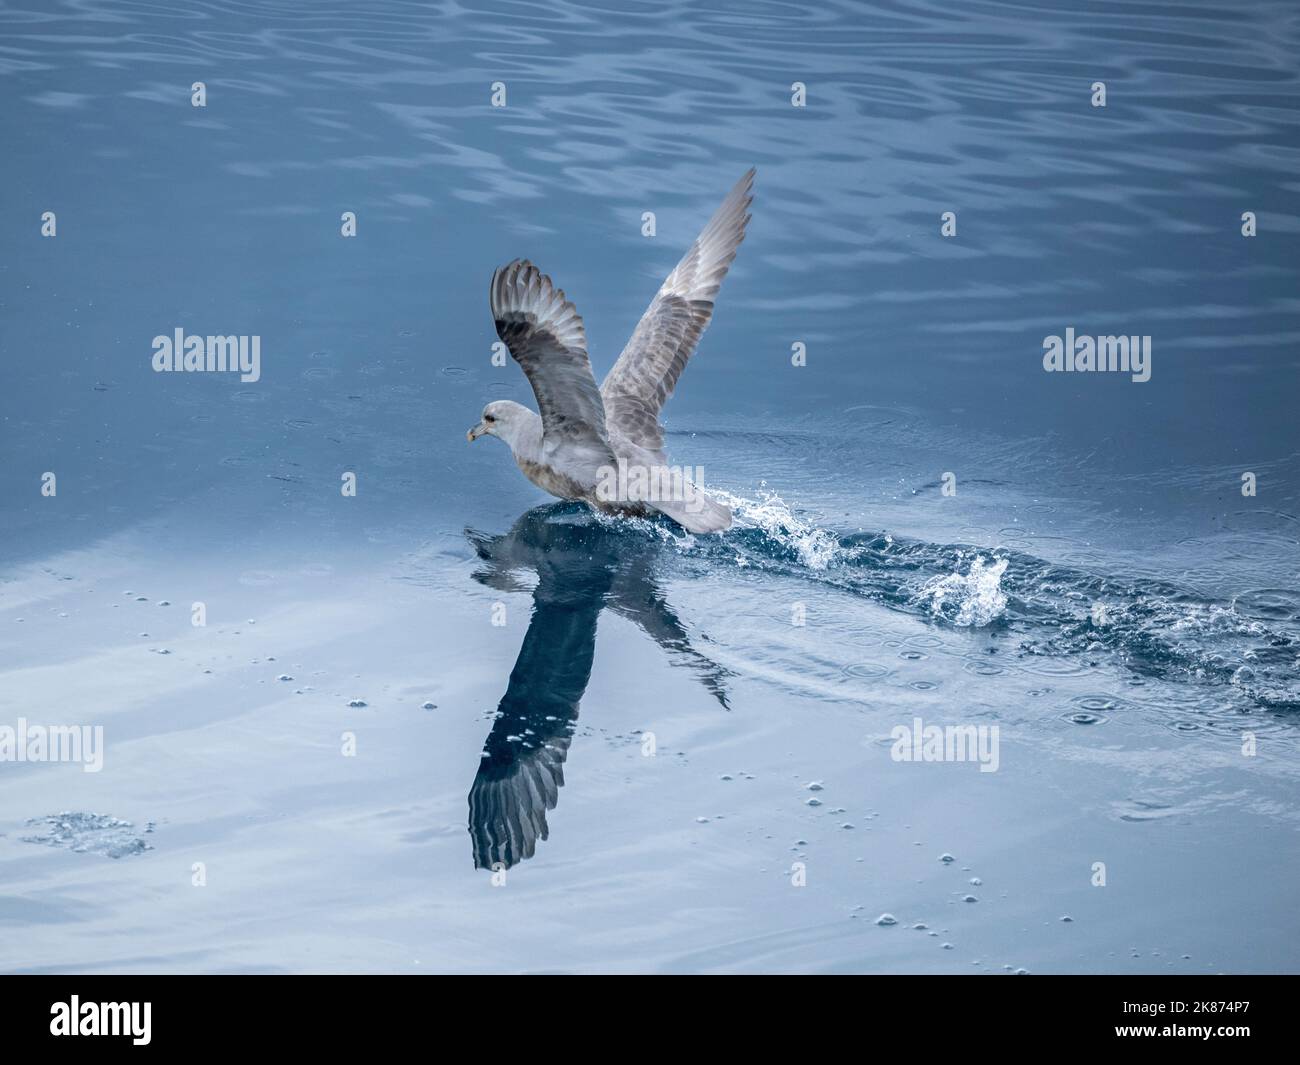 An adult northern fulmar (Fulmarus glacialis) taking flight in calm waters with its reflection, Nunavut, Canada, North America Stock Photo